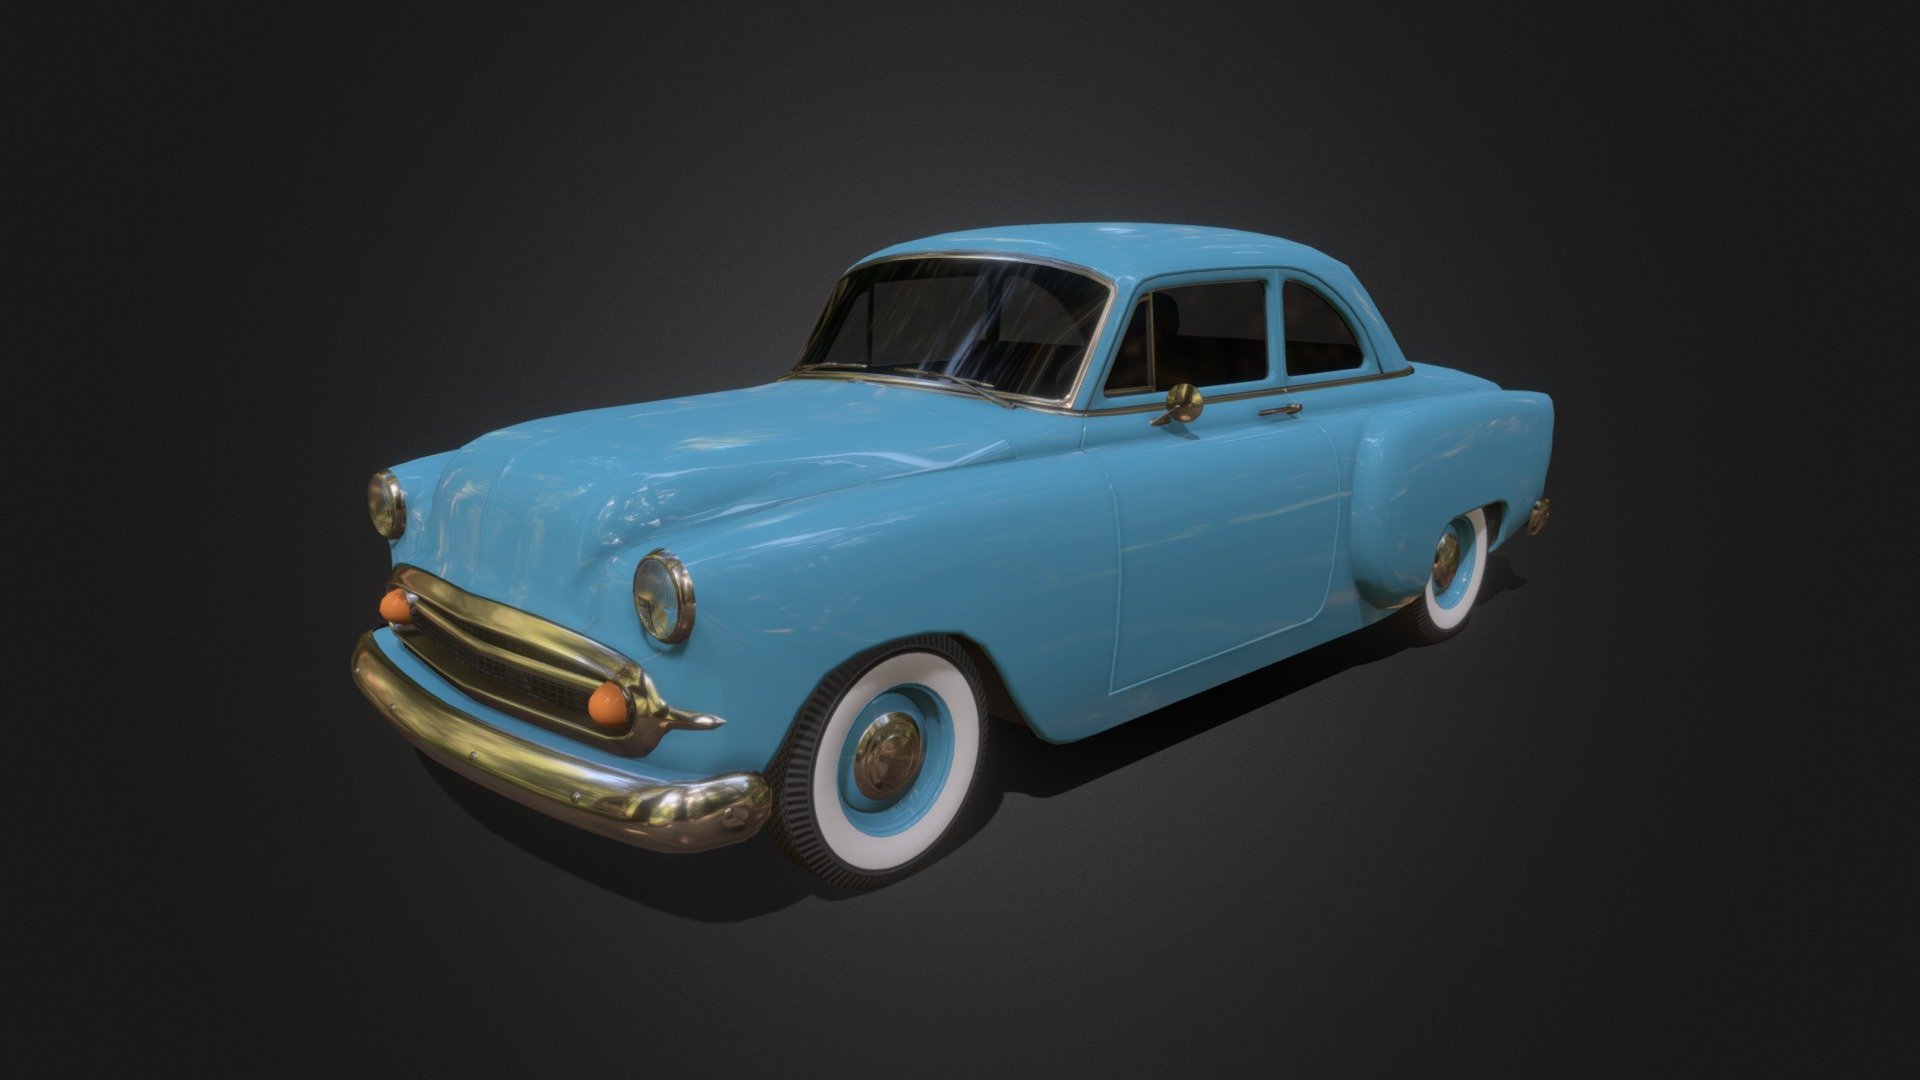 Game-ready vehicle model with Textures, 4 LOD states, and simplified collision meshes.

Vehicle model is based on 1950s car designs with classic white wall tyres 3d model